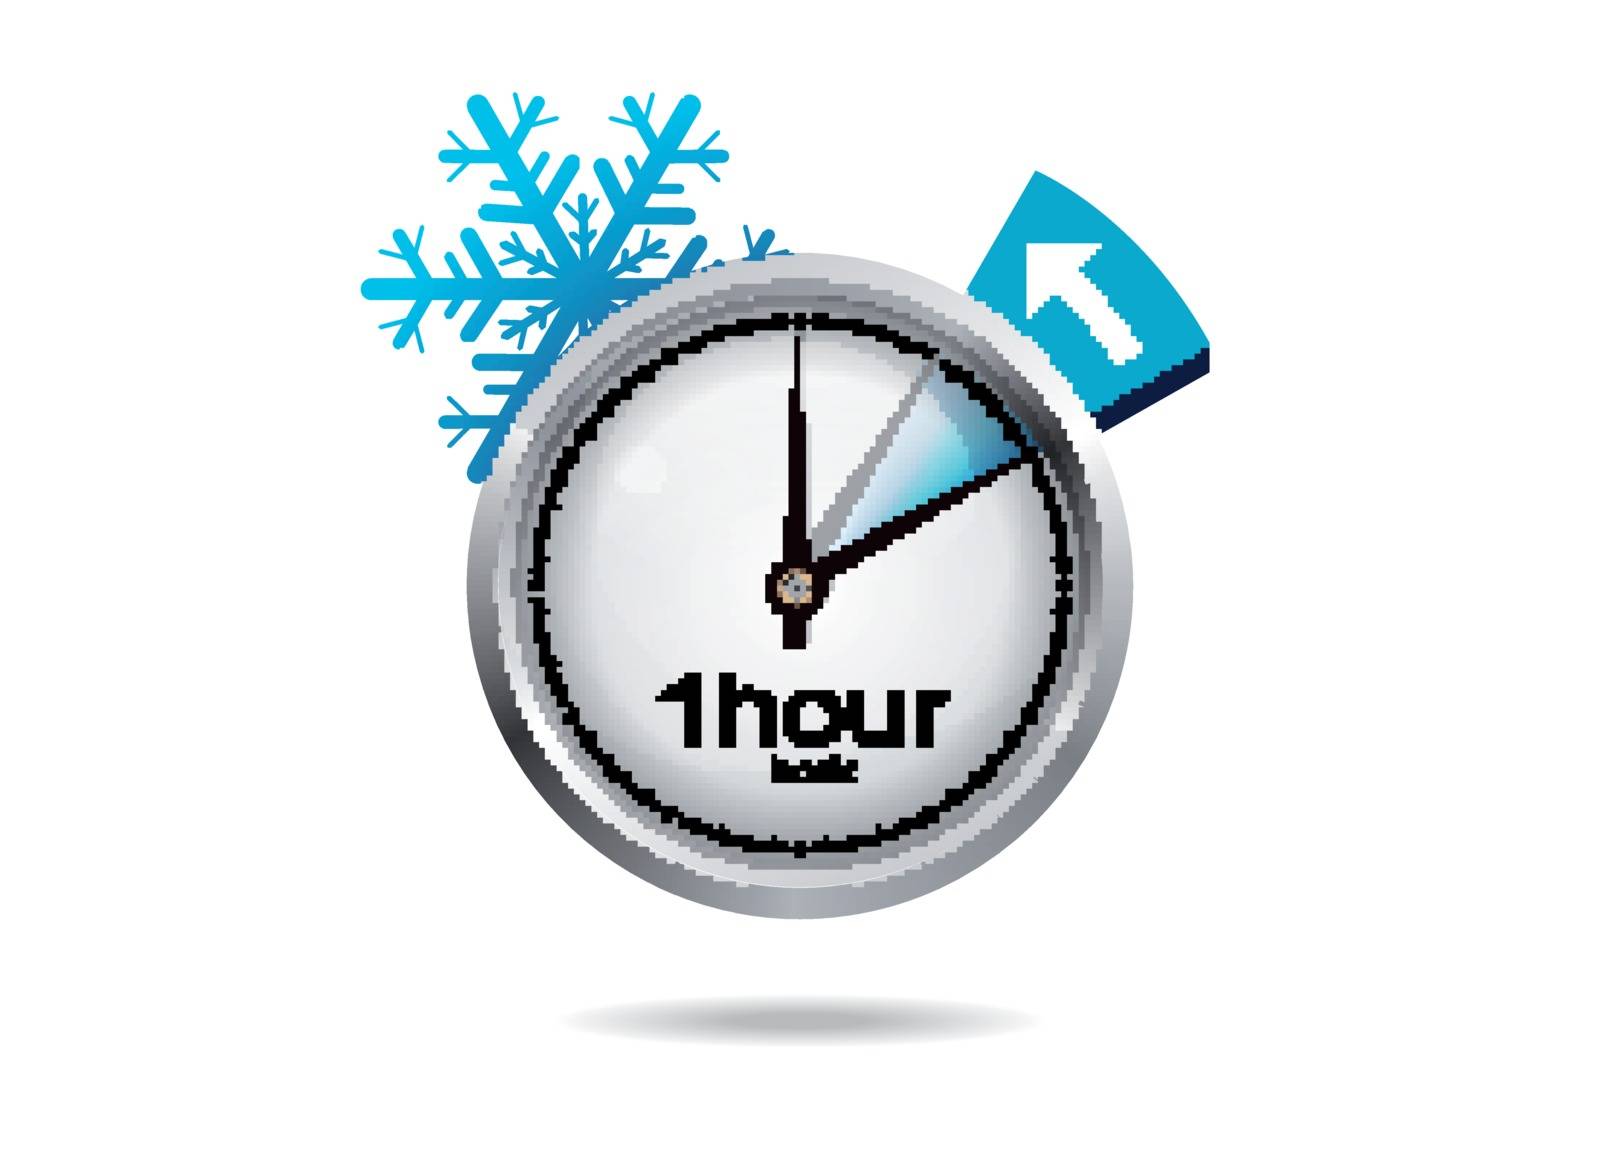 Clock switch to winter time. Vector illustration with snowflake icon on white background